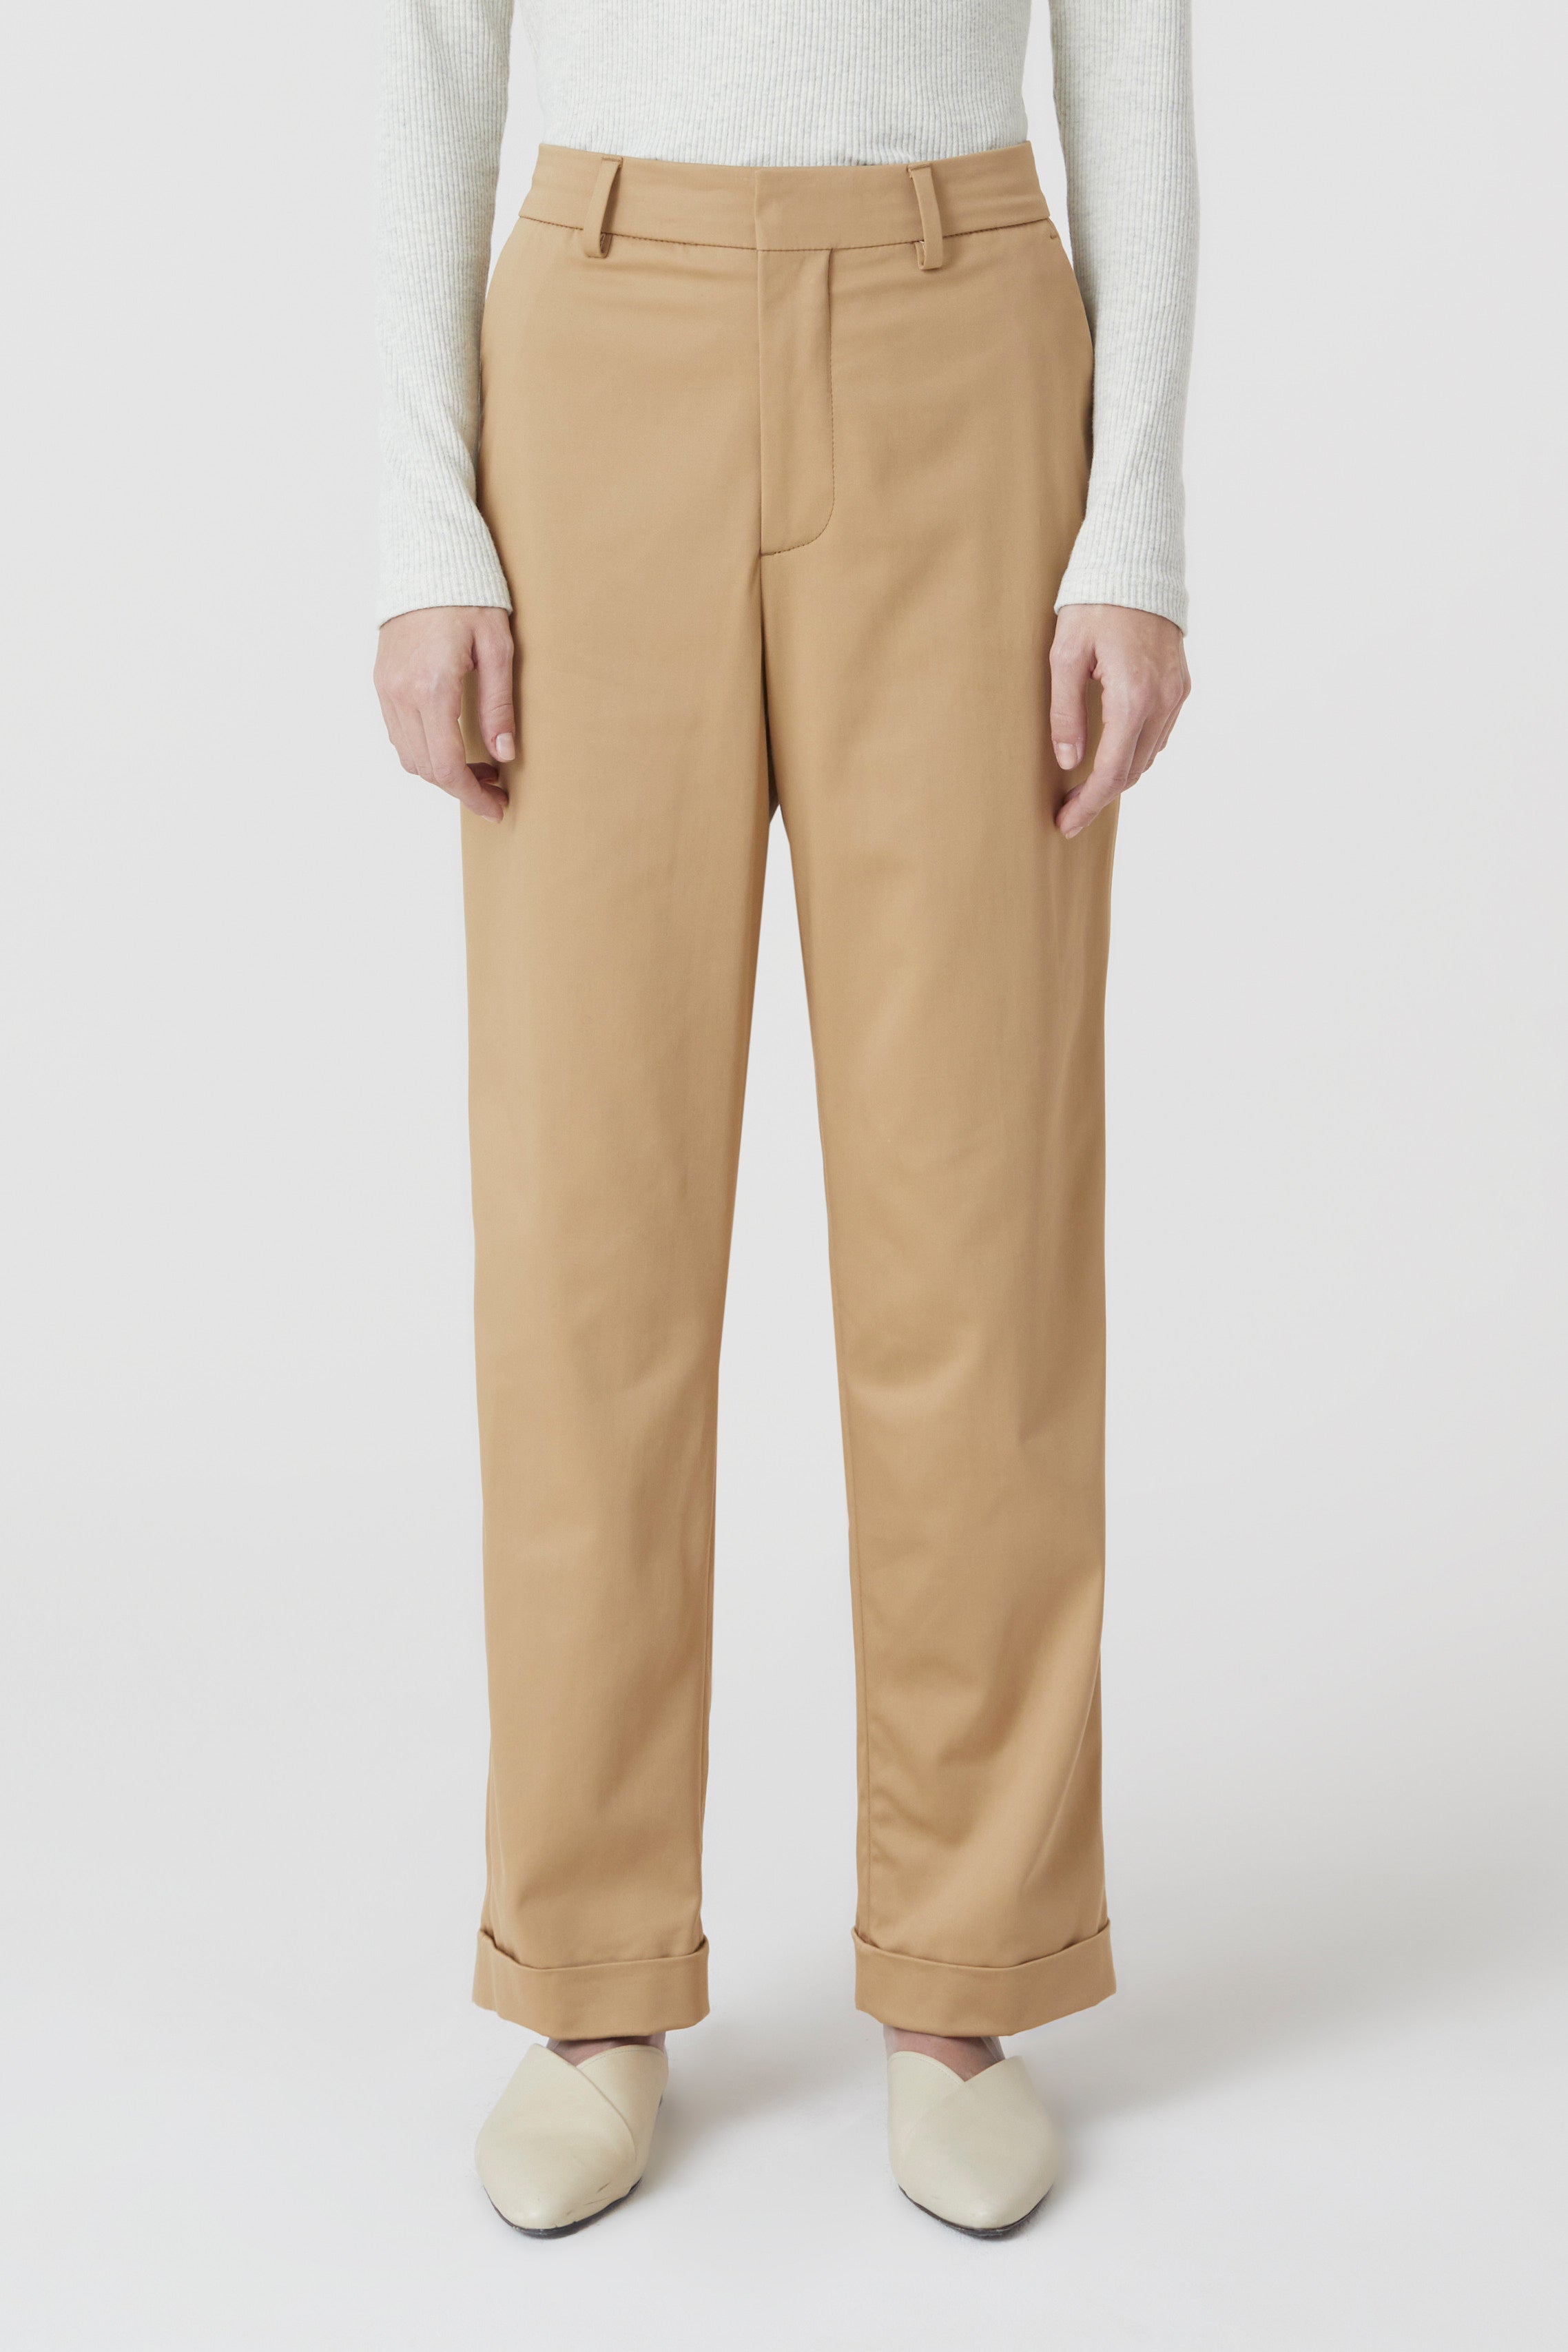 CLOSED-OUTLET-SALE-STYLE-NAME-AUCKLEY-PANTS-Hosen-ARCHIVE-COLLECTION.jpg